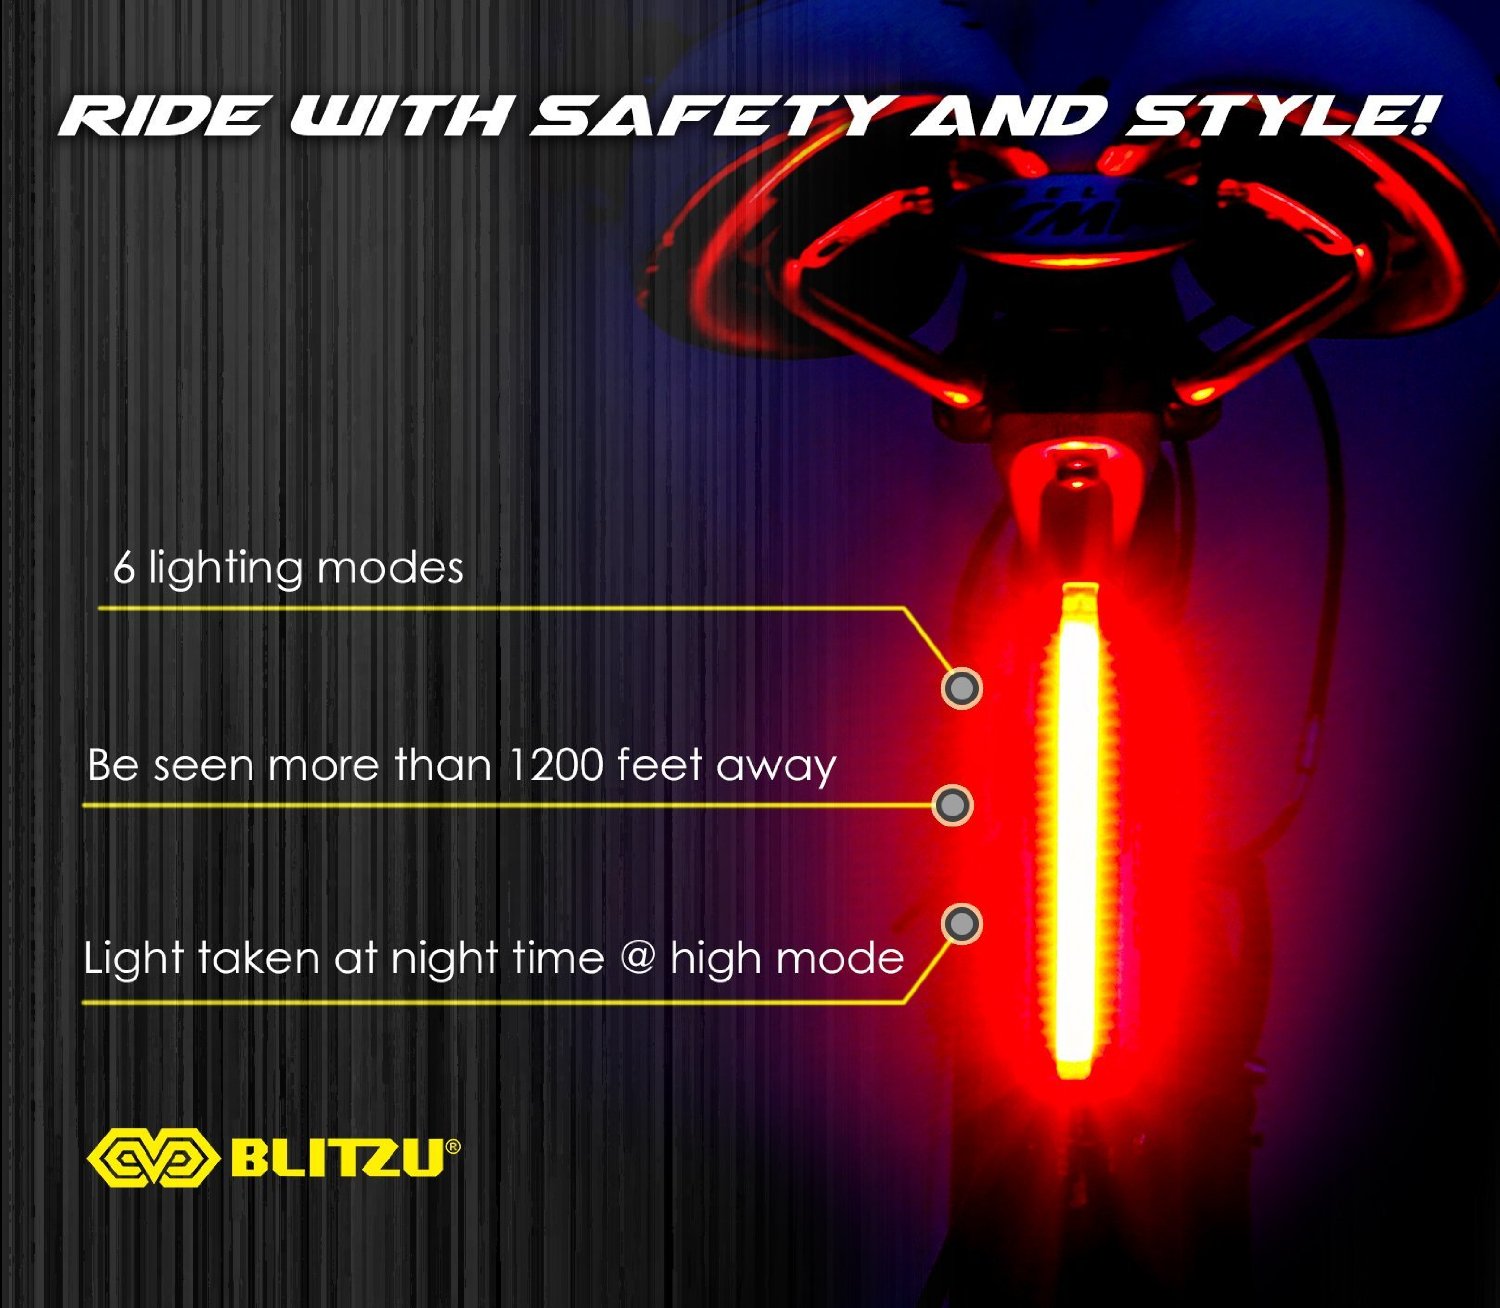 Easily Clips On Red High Intensity Cycling Safety Flashlight Helmet Light 5 Modes Bright Bicycle Rear Light ELECFUN USB Rechargeable LED Bike Tail Light Backpacks Helmets Fits on Any Bikes